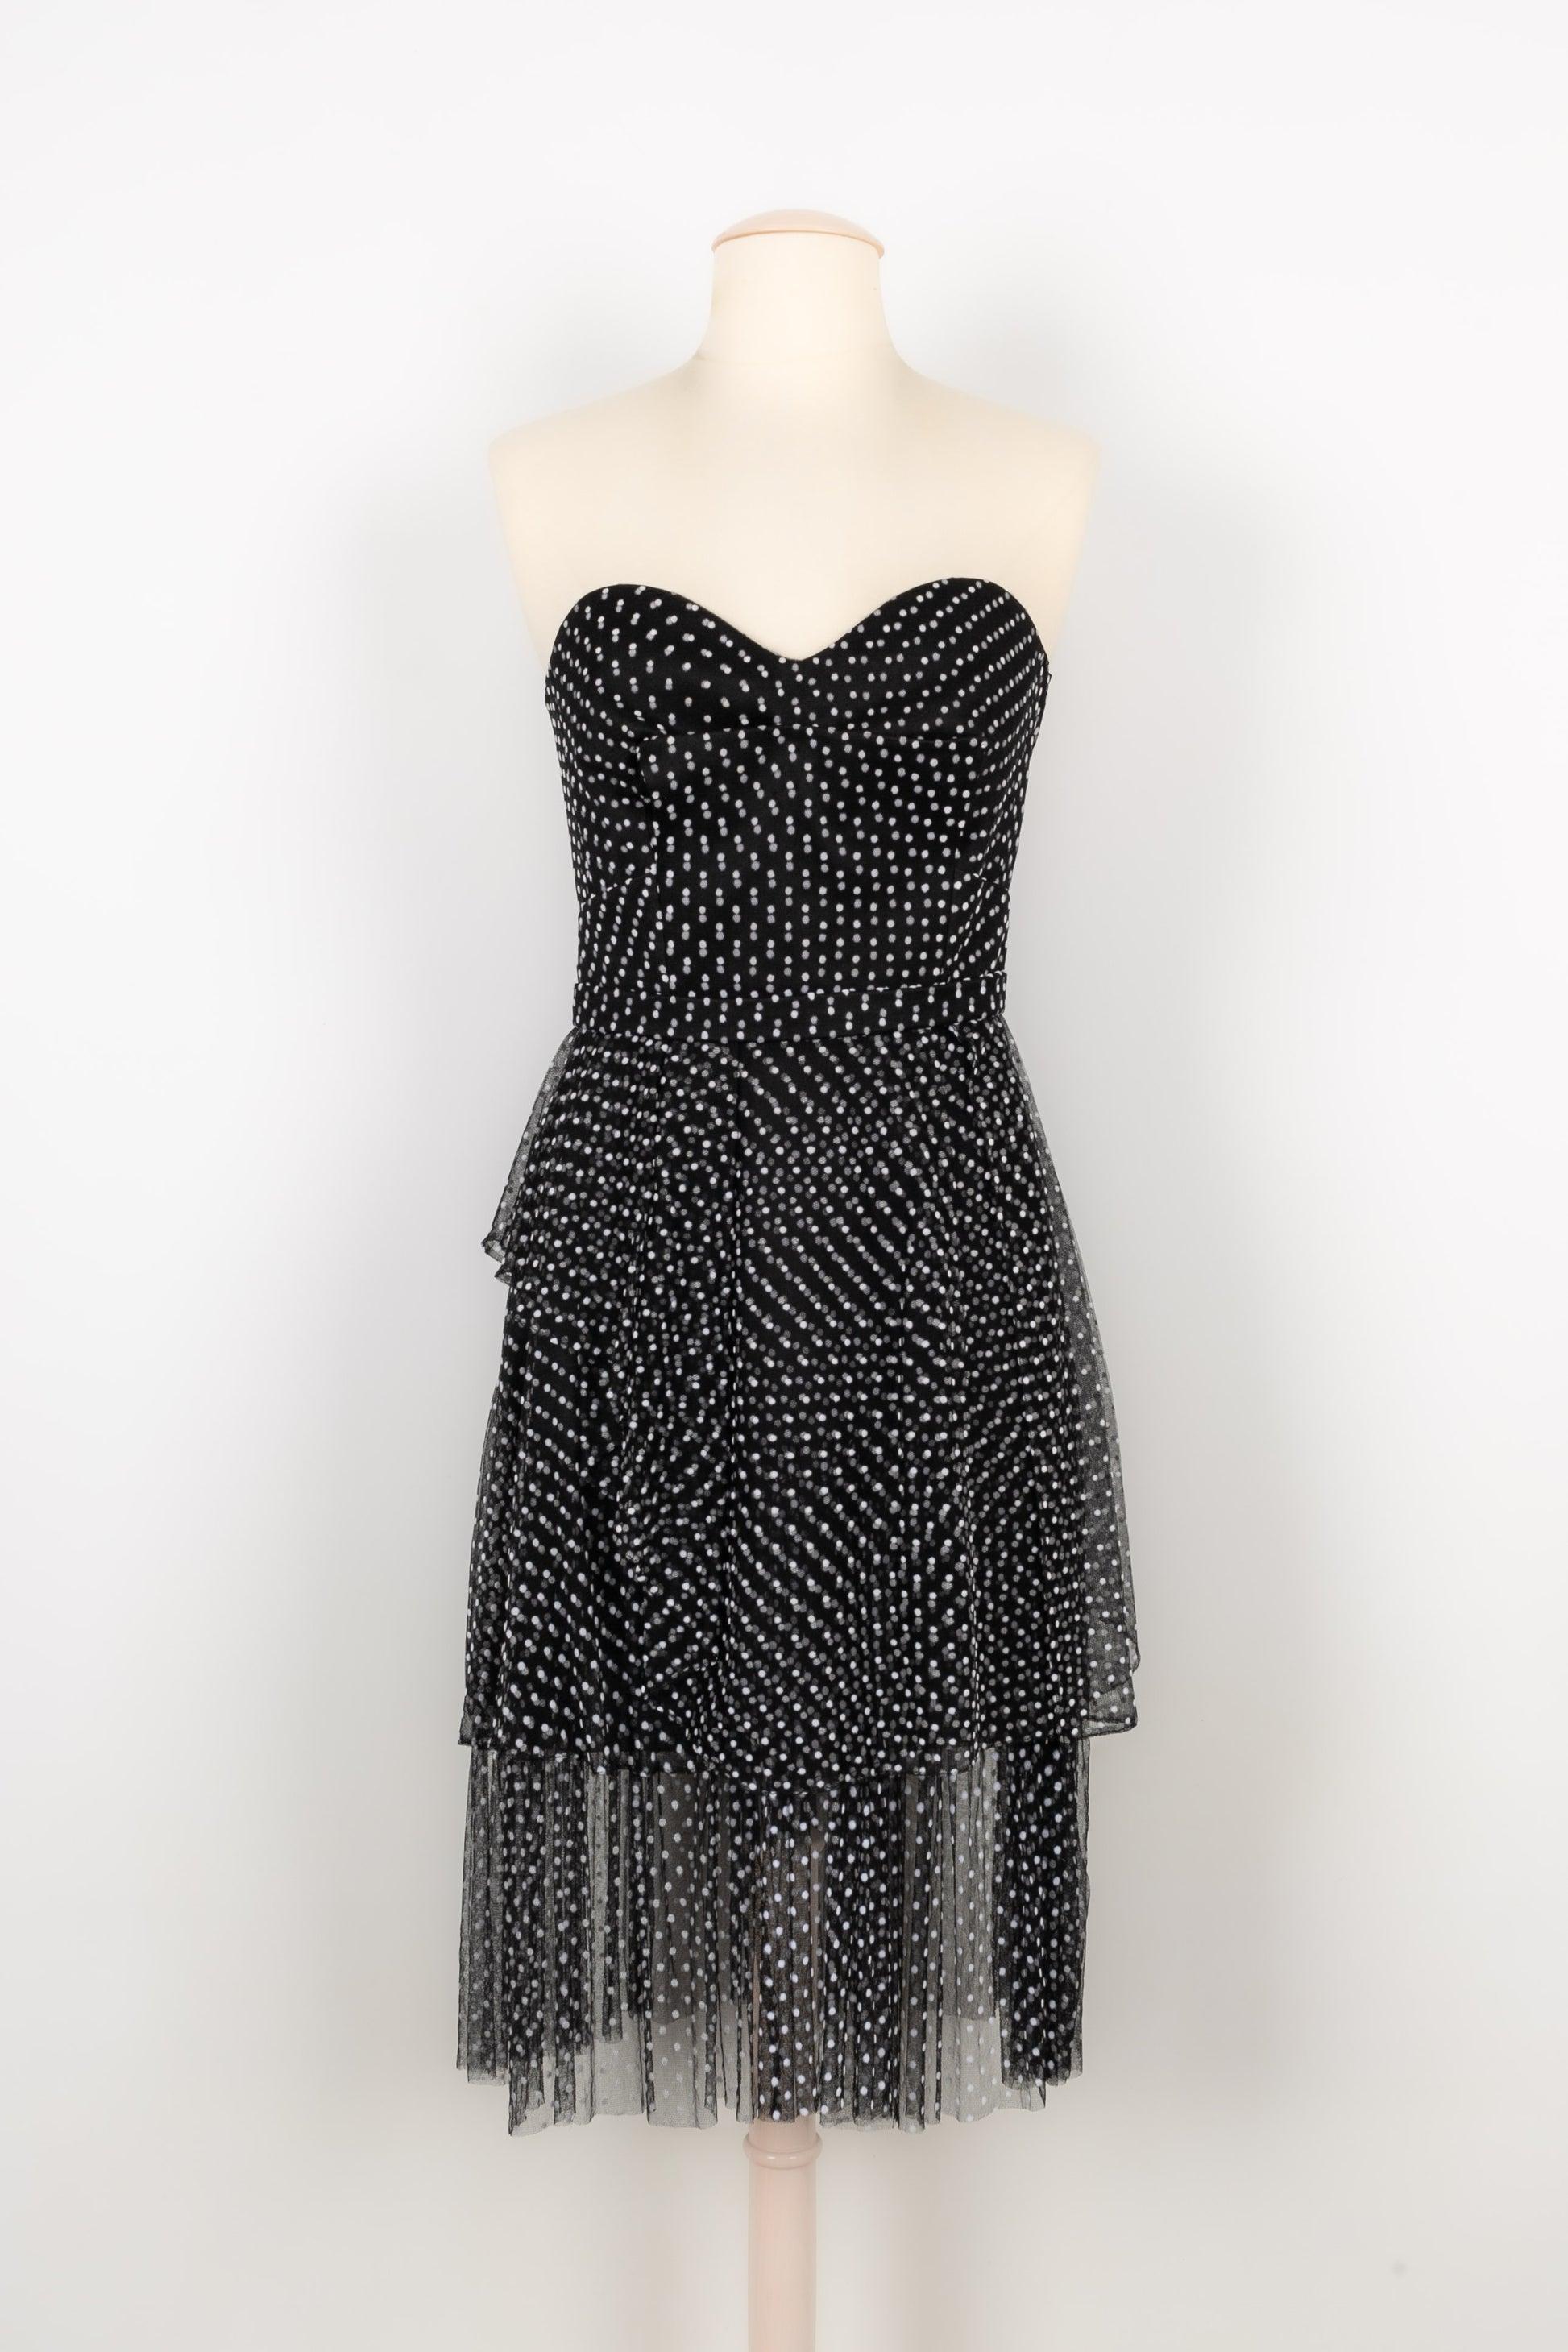 Women's Christian Lacroix Set Composed of a Dress and a Bolero in Polka Dot, 1990s For Sale